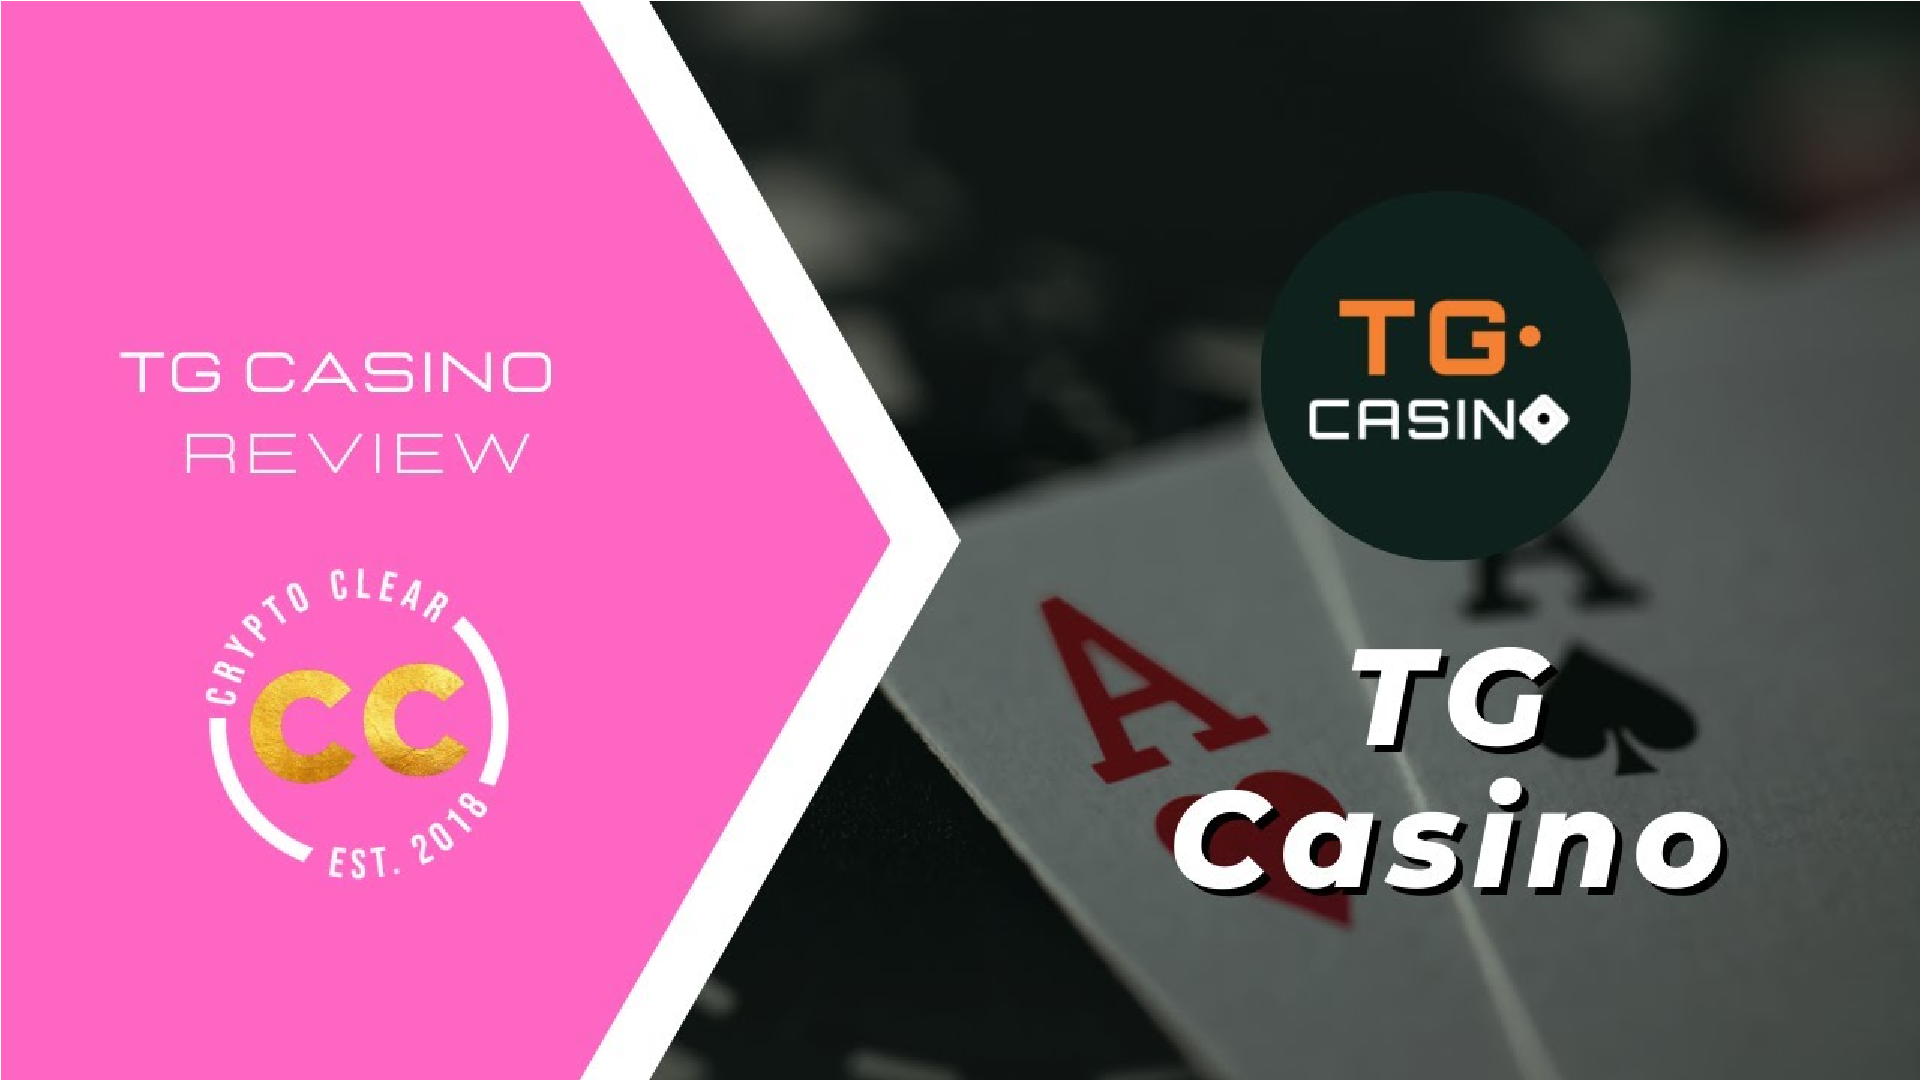 Crypto Clear YouTube Channel Reviews TG.Casino - Could This Be the Next 100x Crypto Gem?